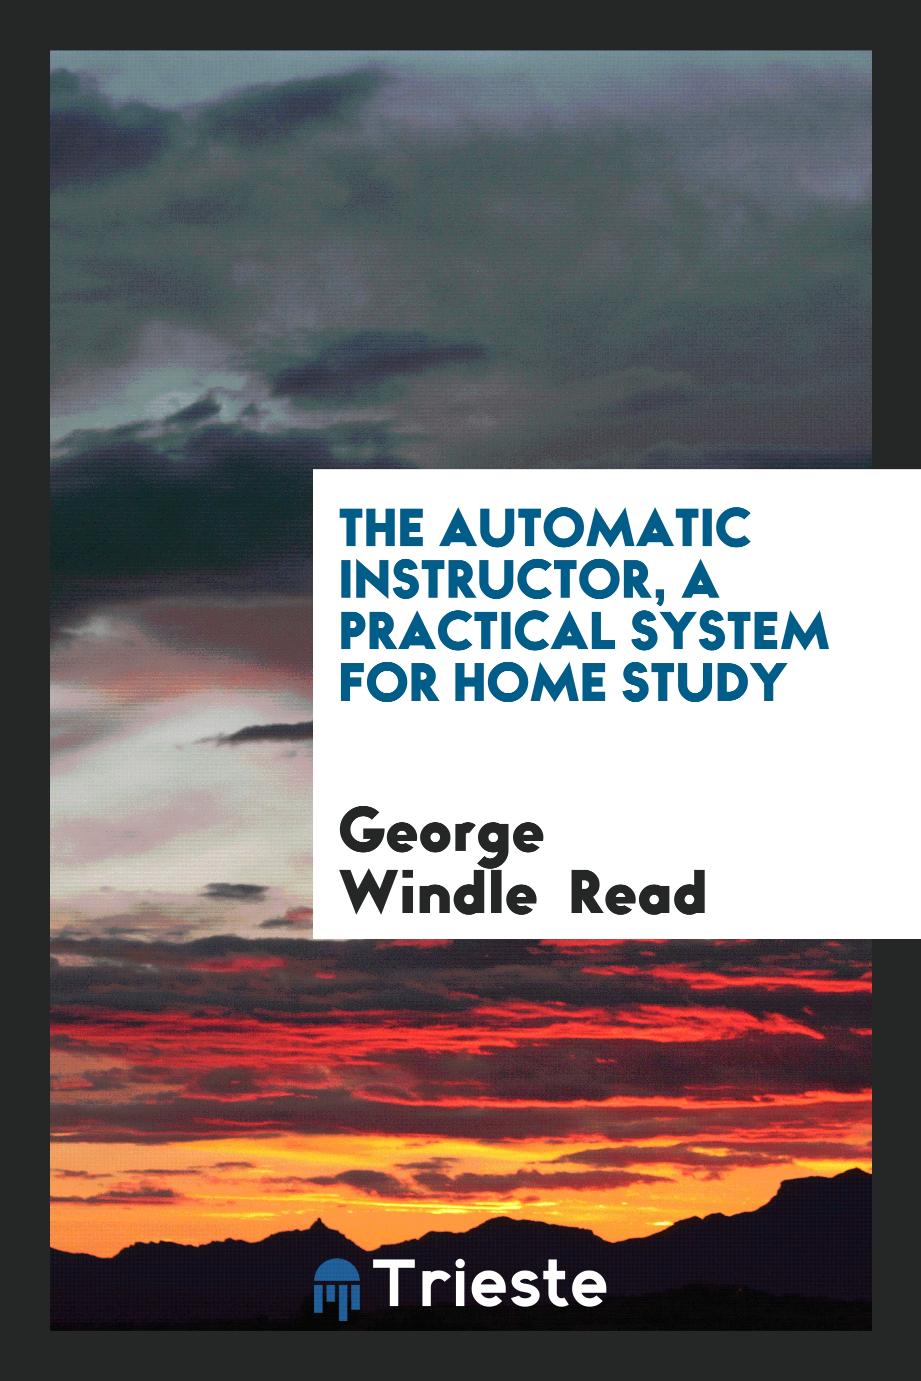 The Automatic Instructor, A Practical System for Home Study